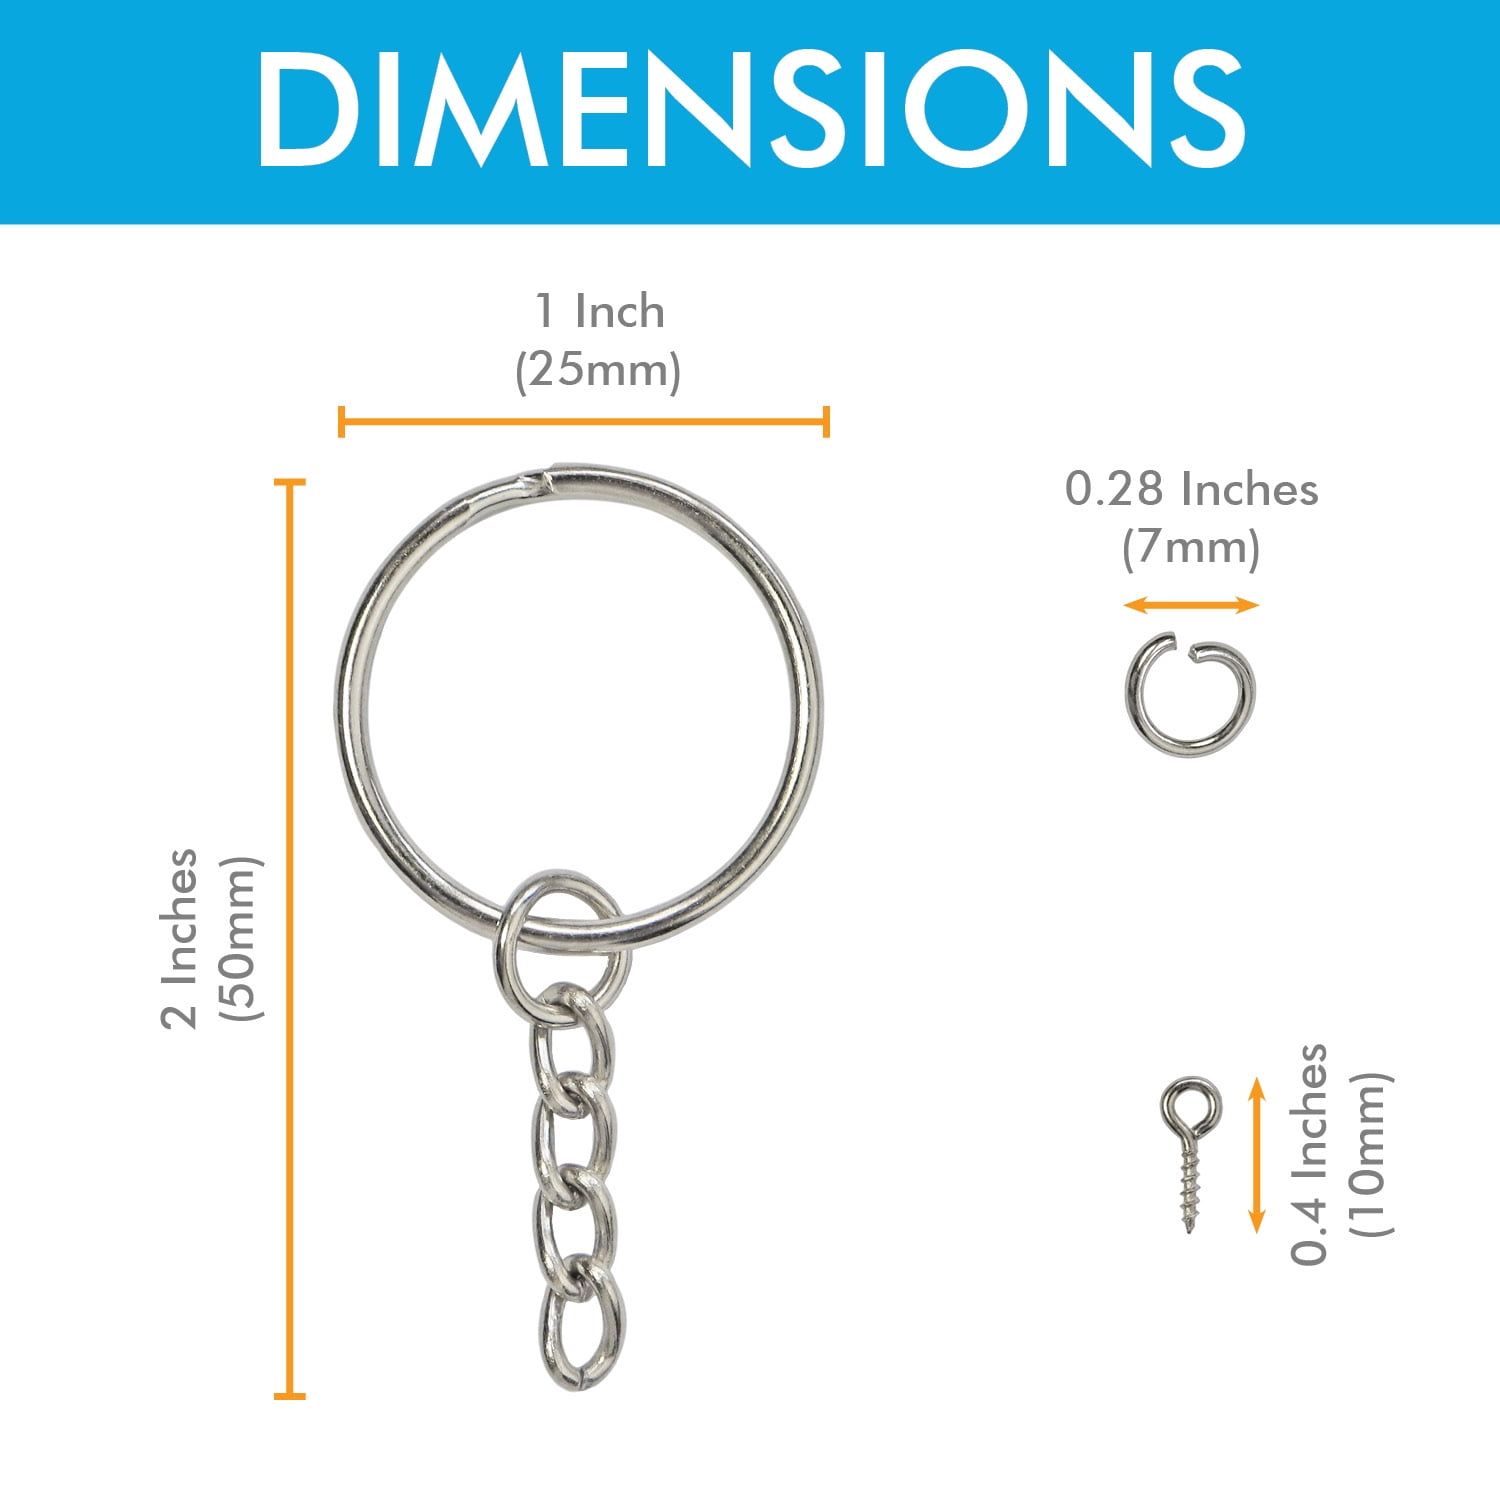  60 Pcs Split Key Ring with Chain and 60 Pcs Jump Rings Keychain  Ring Bulk Kit with Screw Eye Pins for Crafts Making Jewelry 0.98 Inch Key  Ring 0.32 Inch Metal